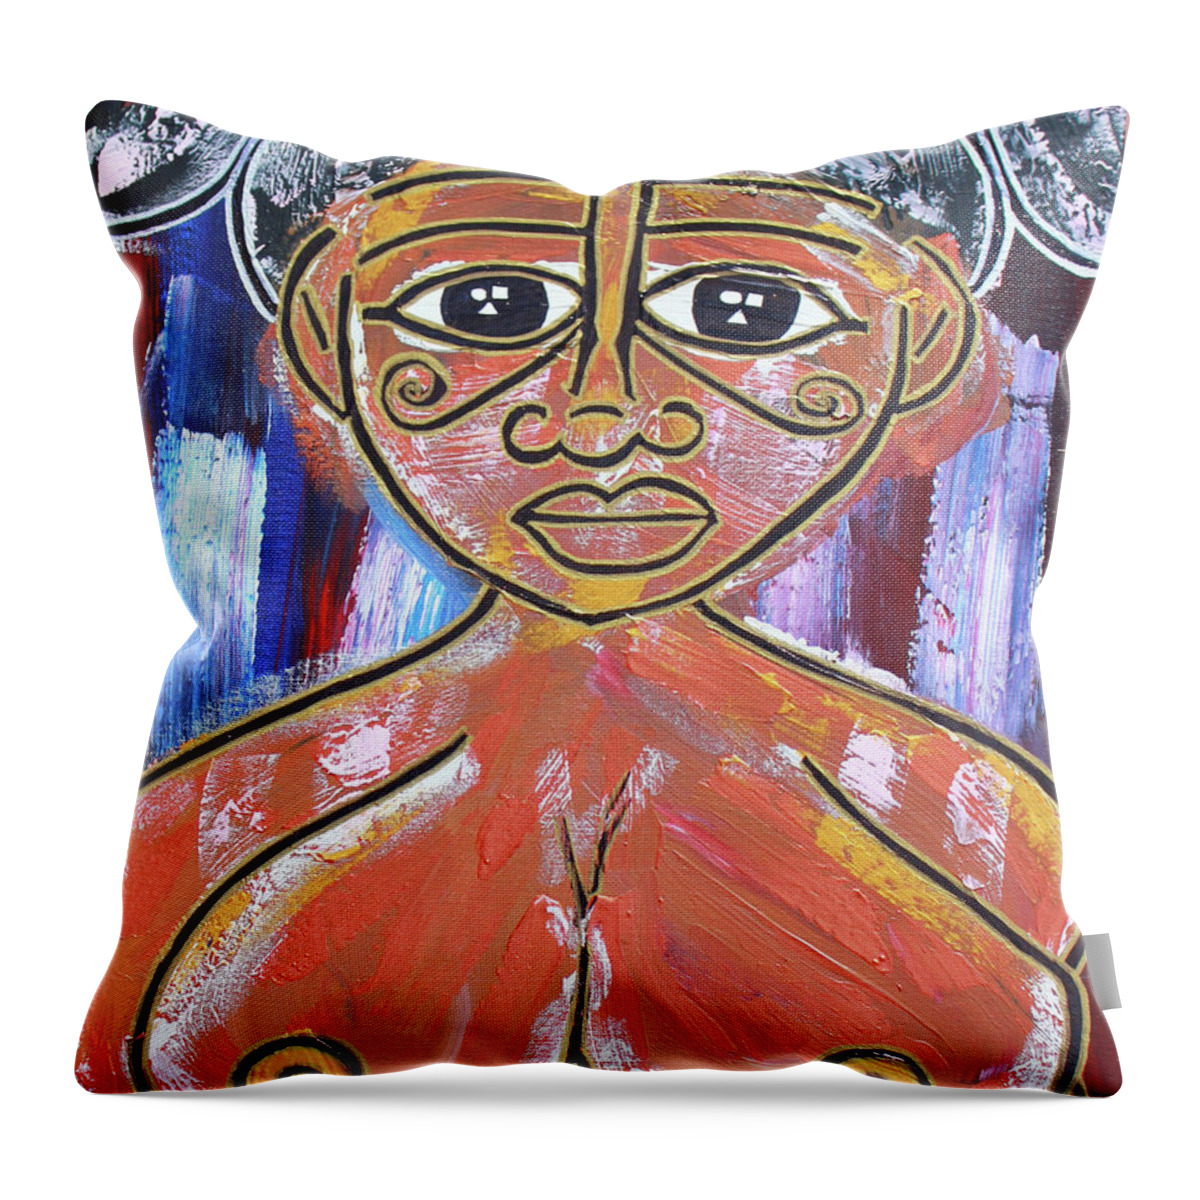  Throw Pillow featuring the painting Kissed By The Sun by Odalo Wasikhongo